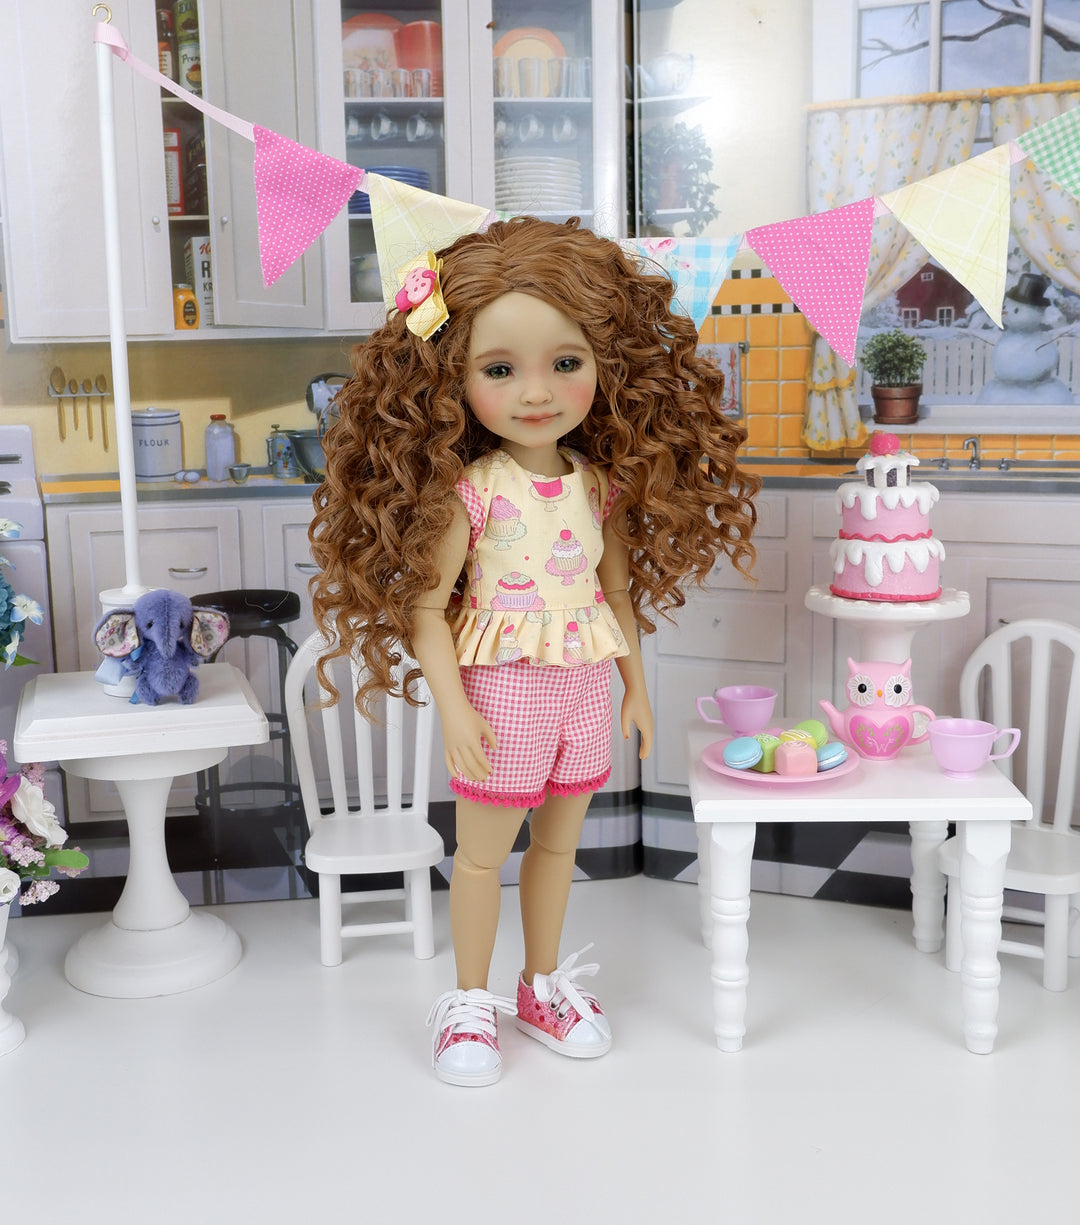 Frosted Cupcakes - top & shorts with shoes for Ruby Red Fashion Friends doll